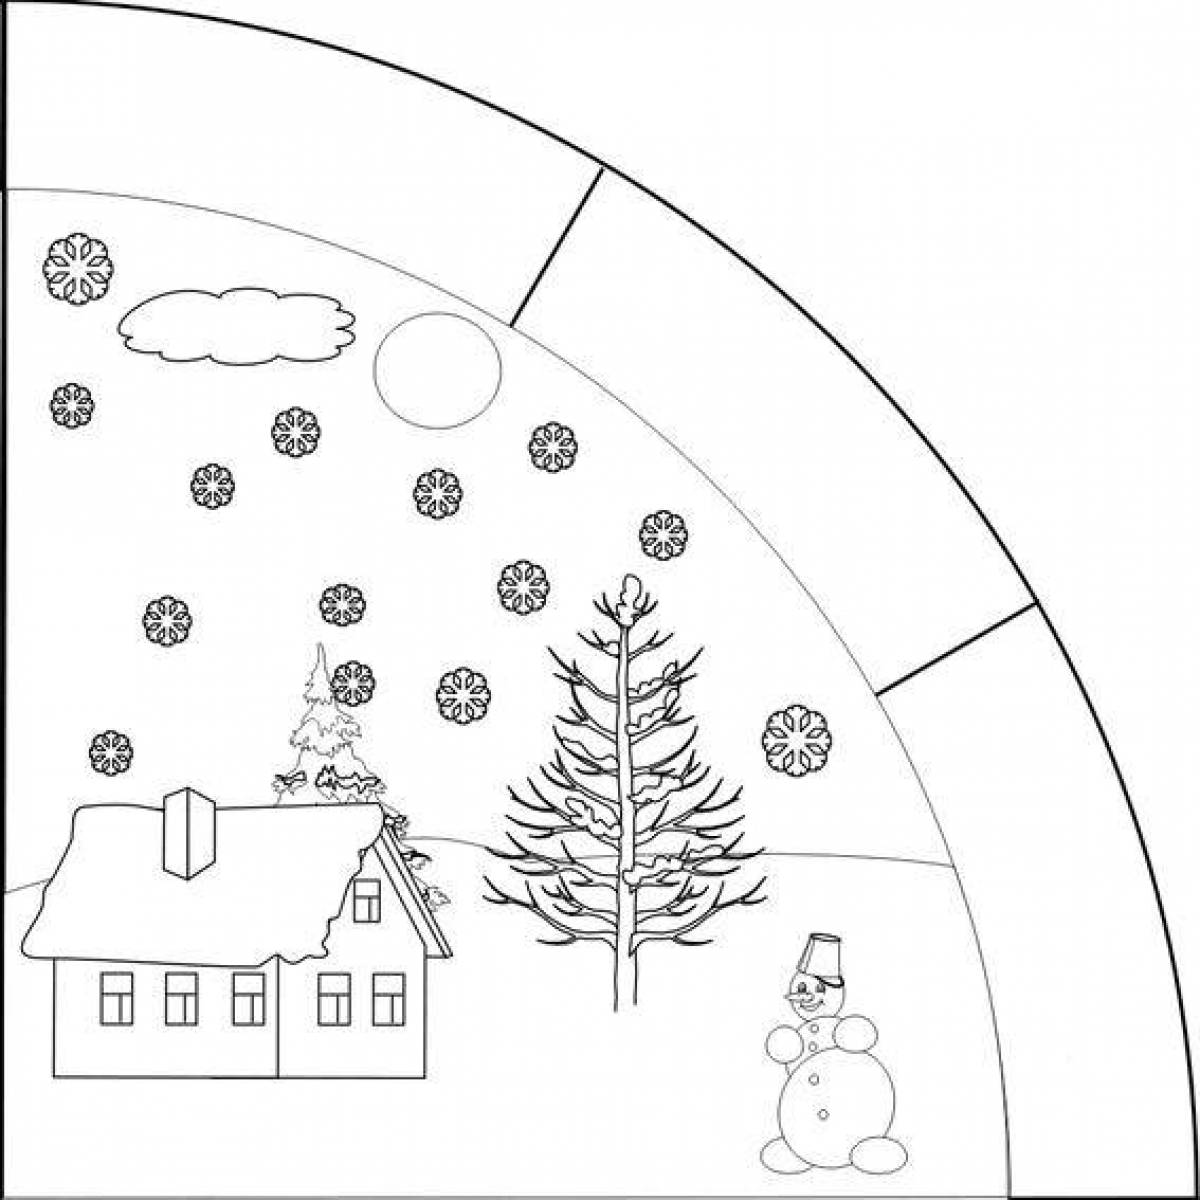 Great winter coloring book for kids